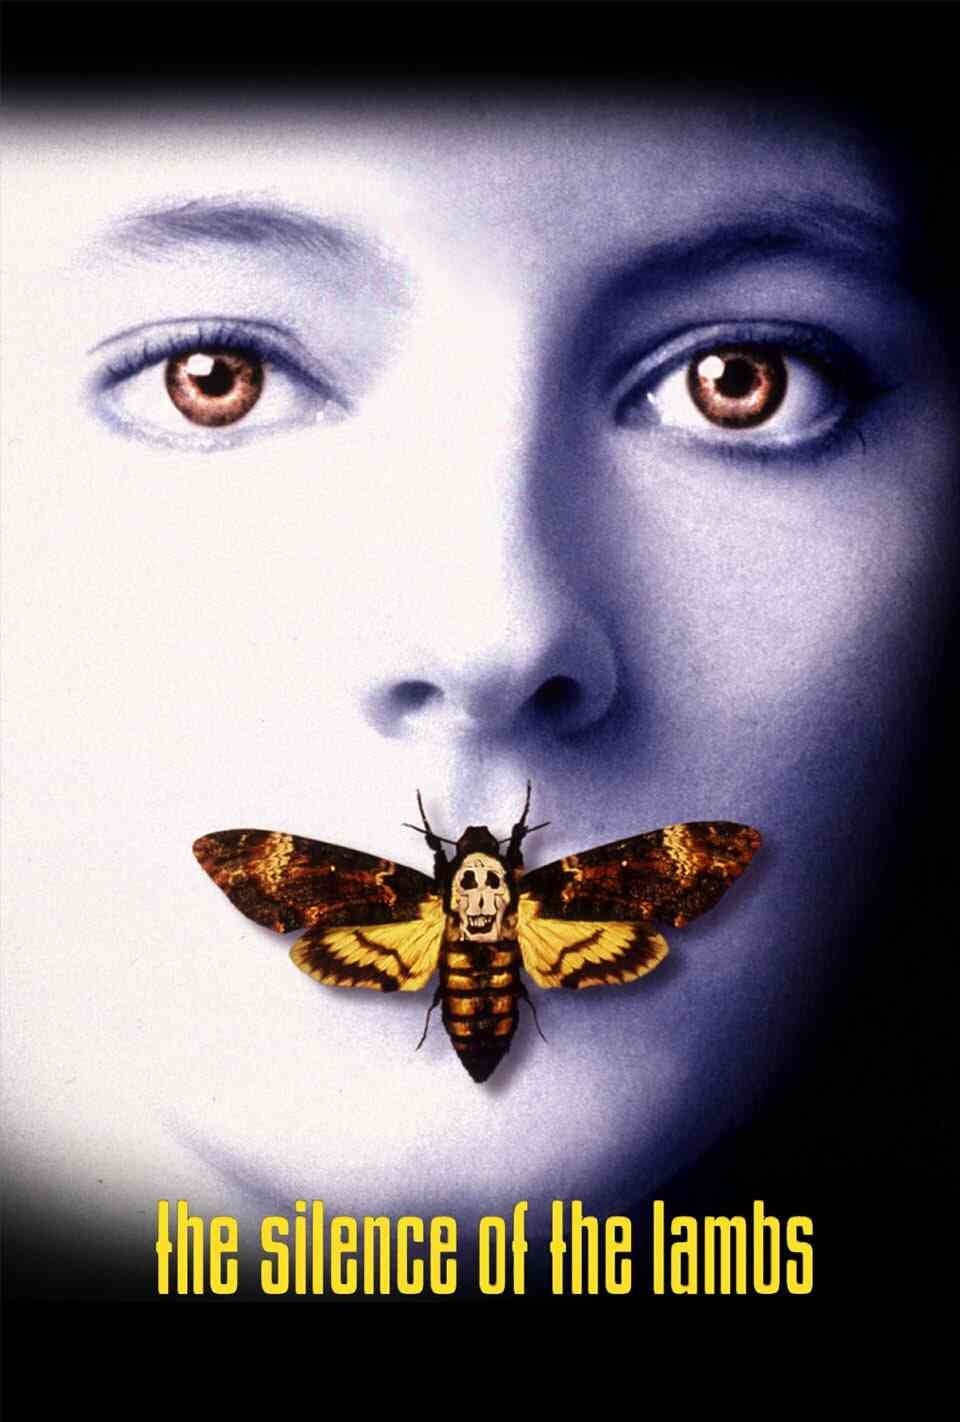 Read The Silence of the Lambs screenplay (poster)